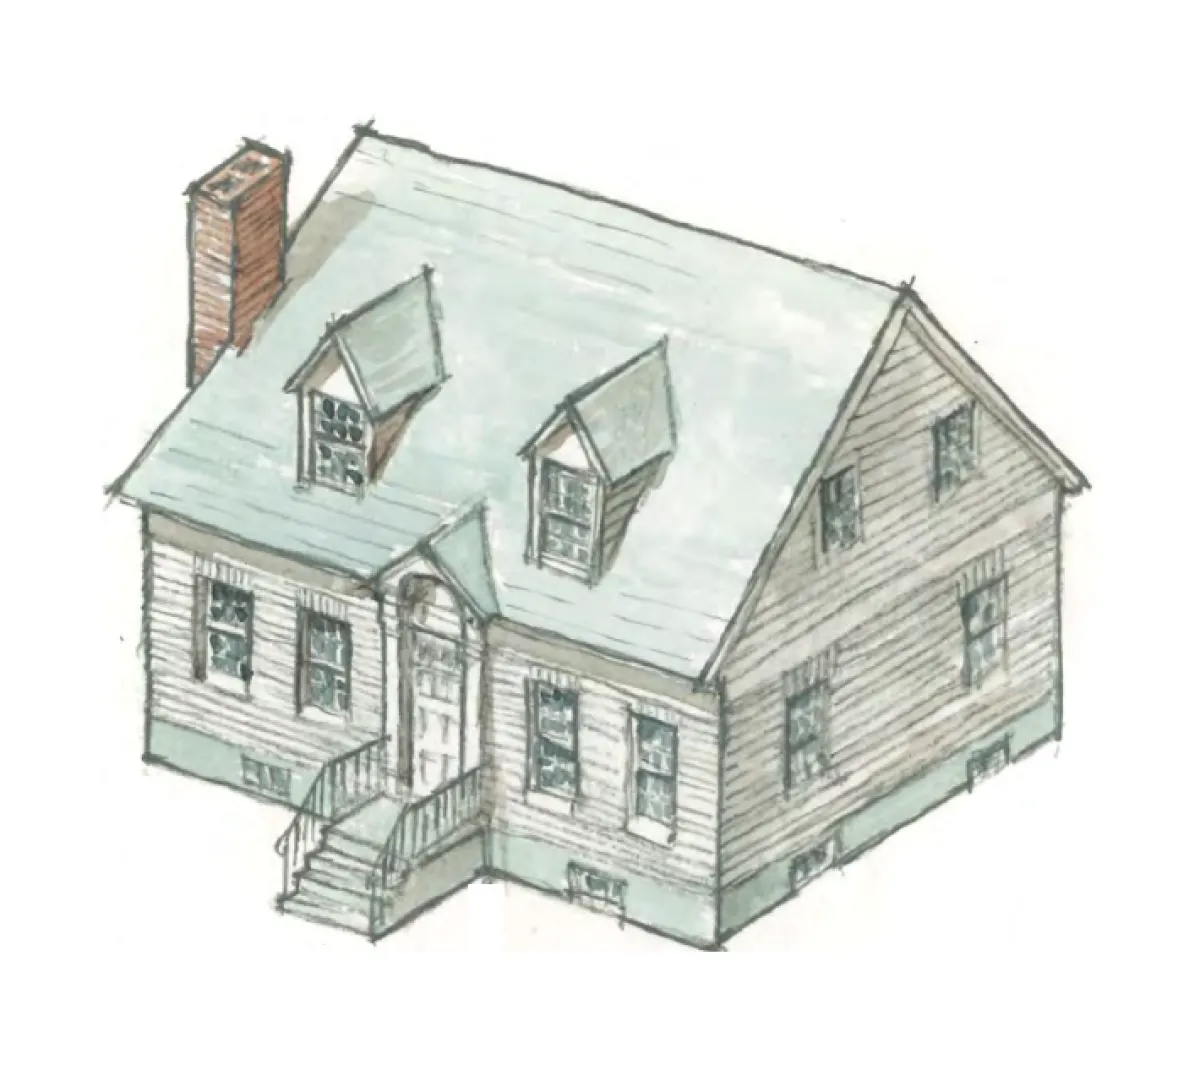 American Colonial Revival Architecture